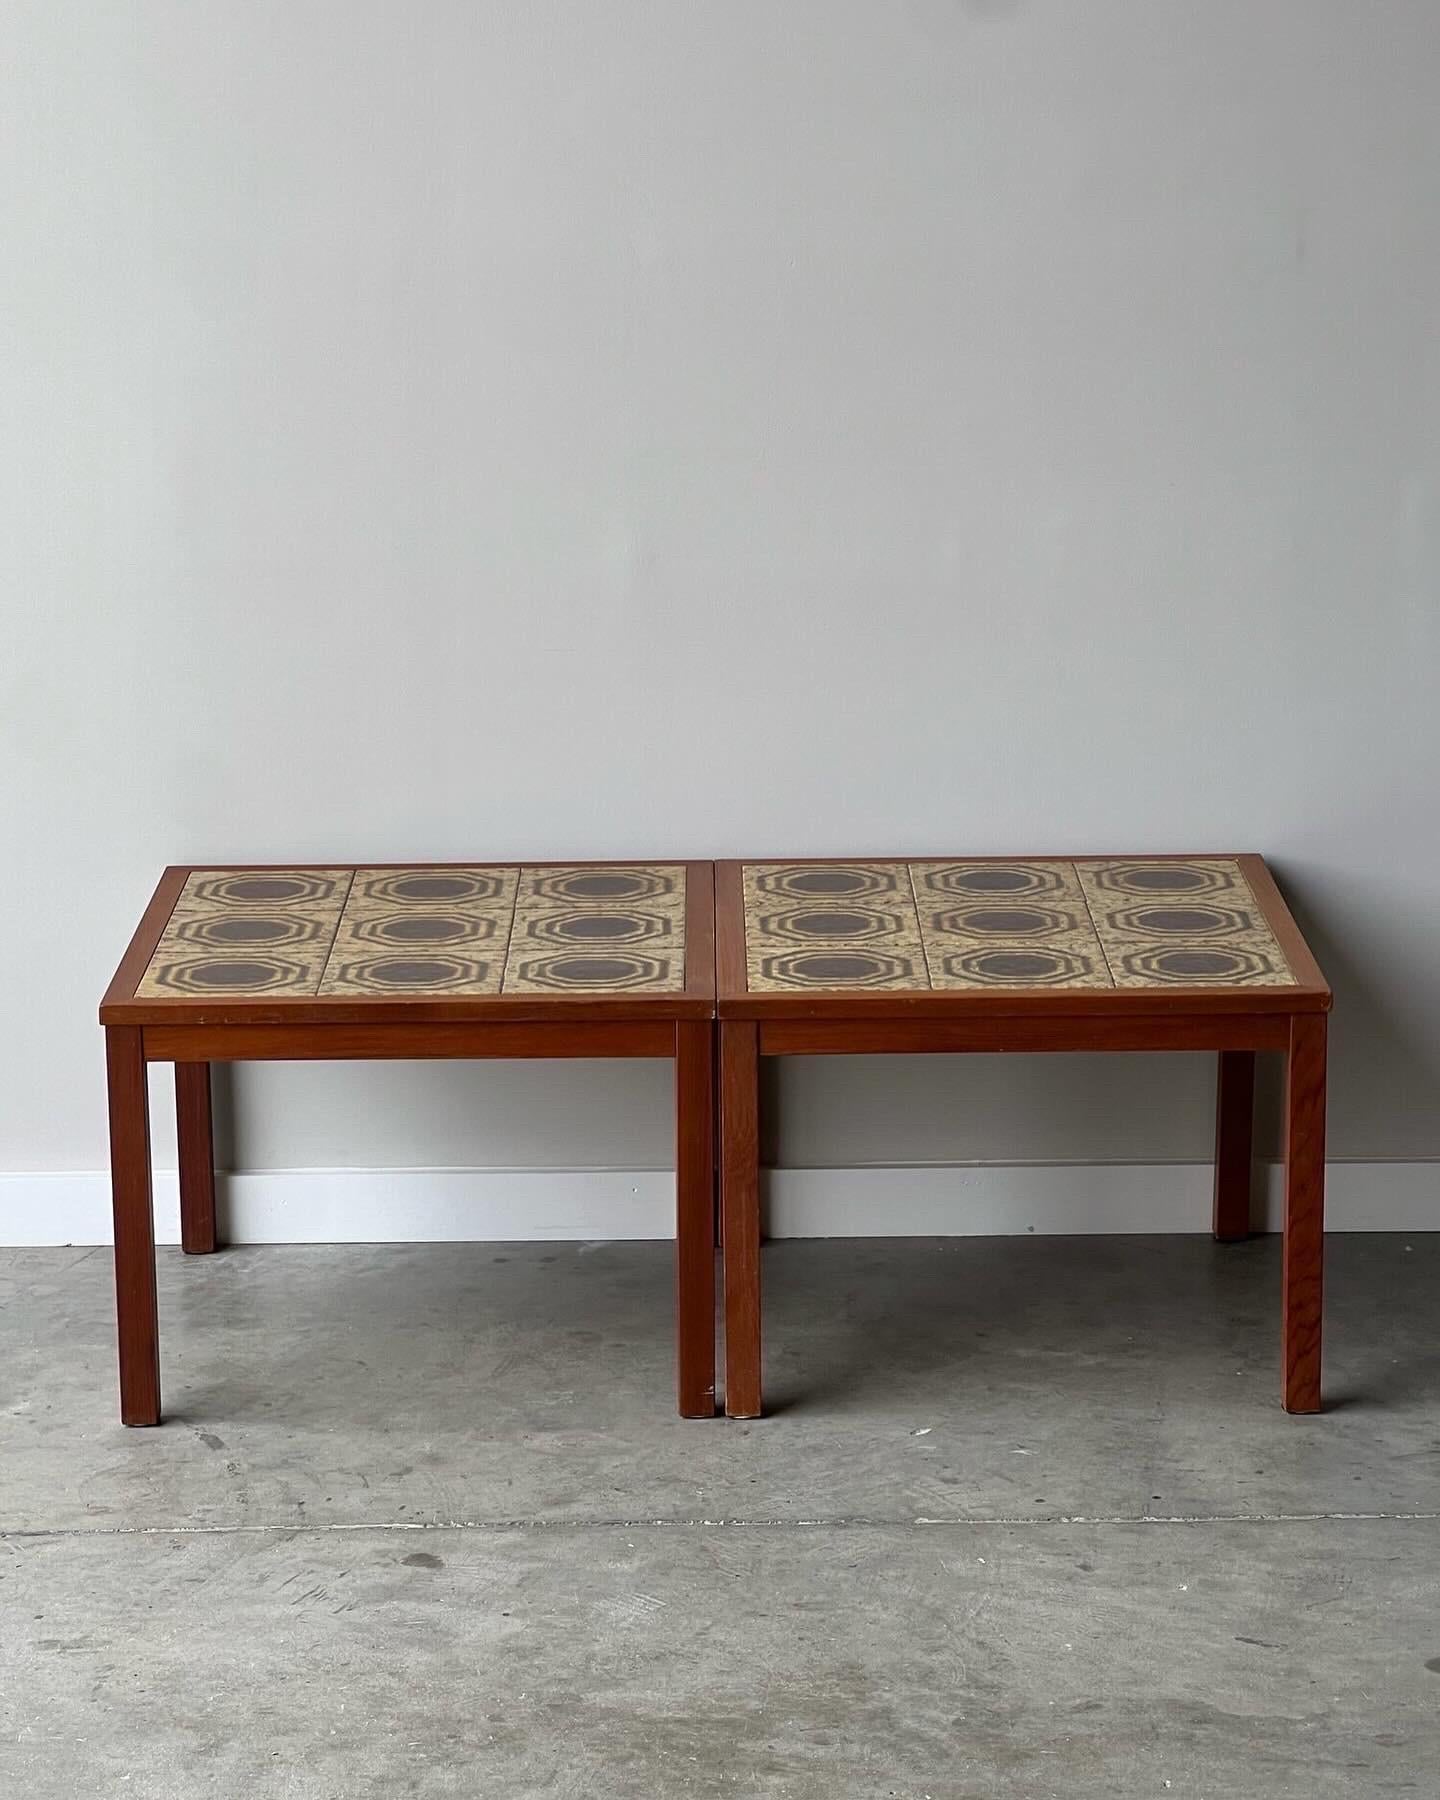 Late 20th Century Vintage Danish Tile Top End Tables - a Pair For Sale